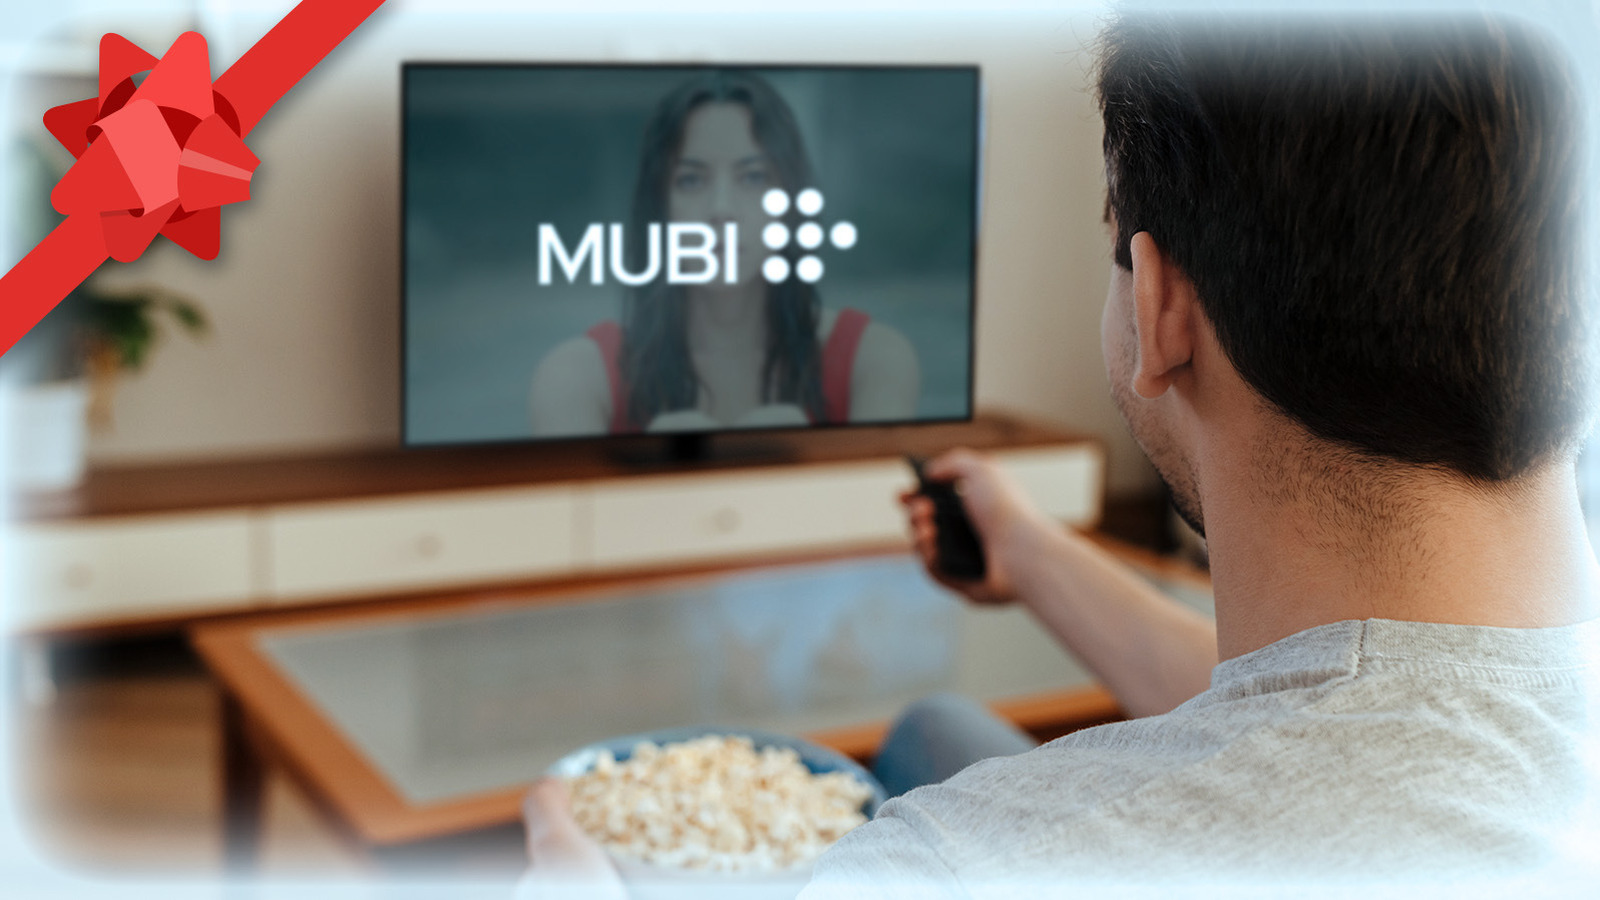 Enter now to win a coveted one-year MUBI pass with just one simple click – the ultimate prize for movie enthusiasts!